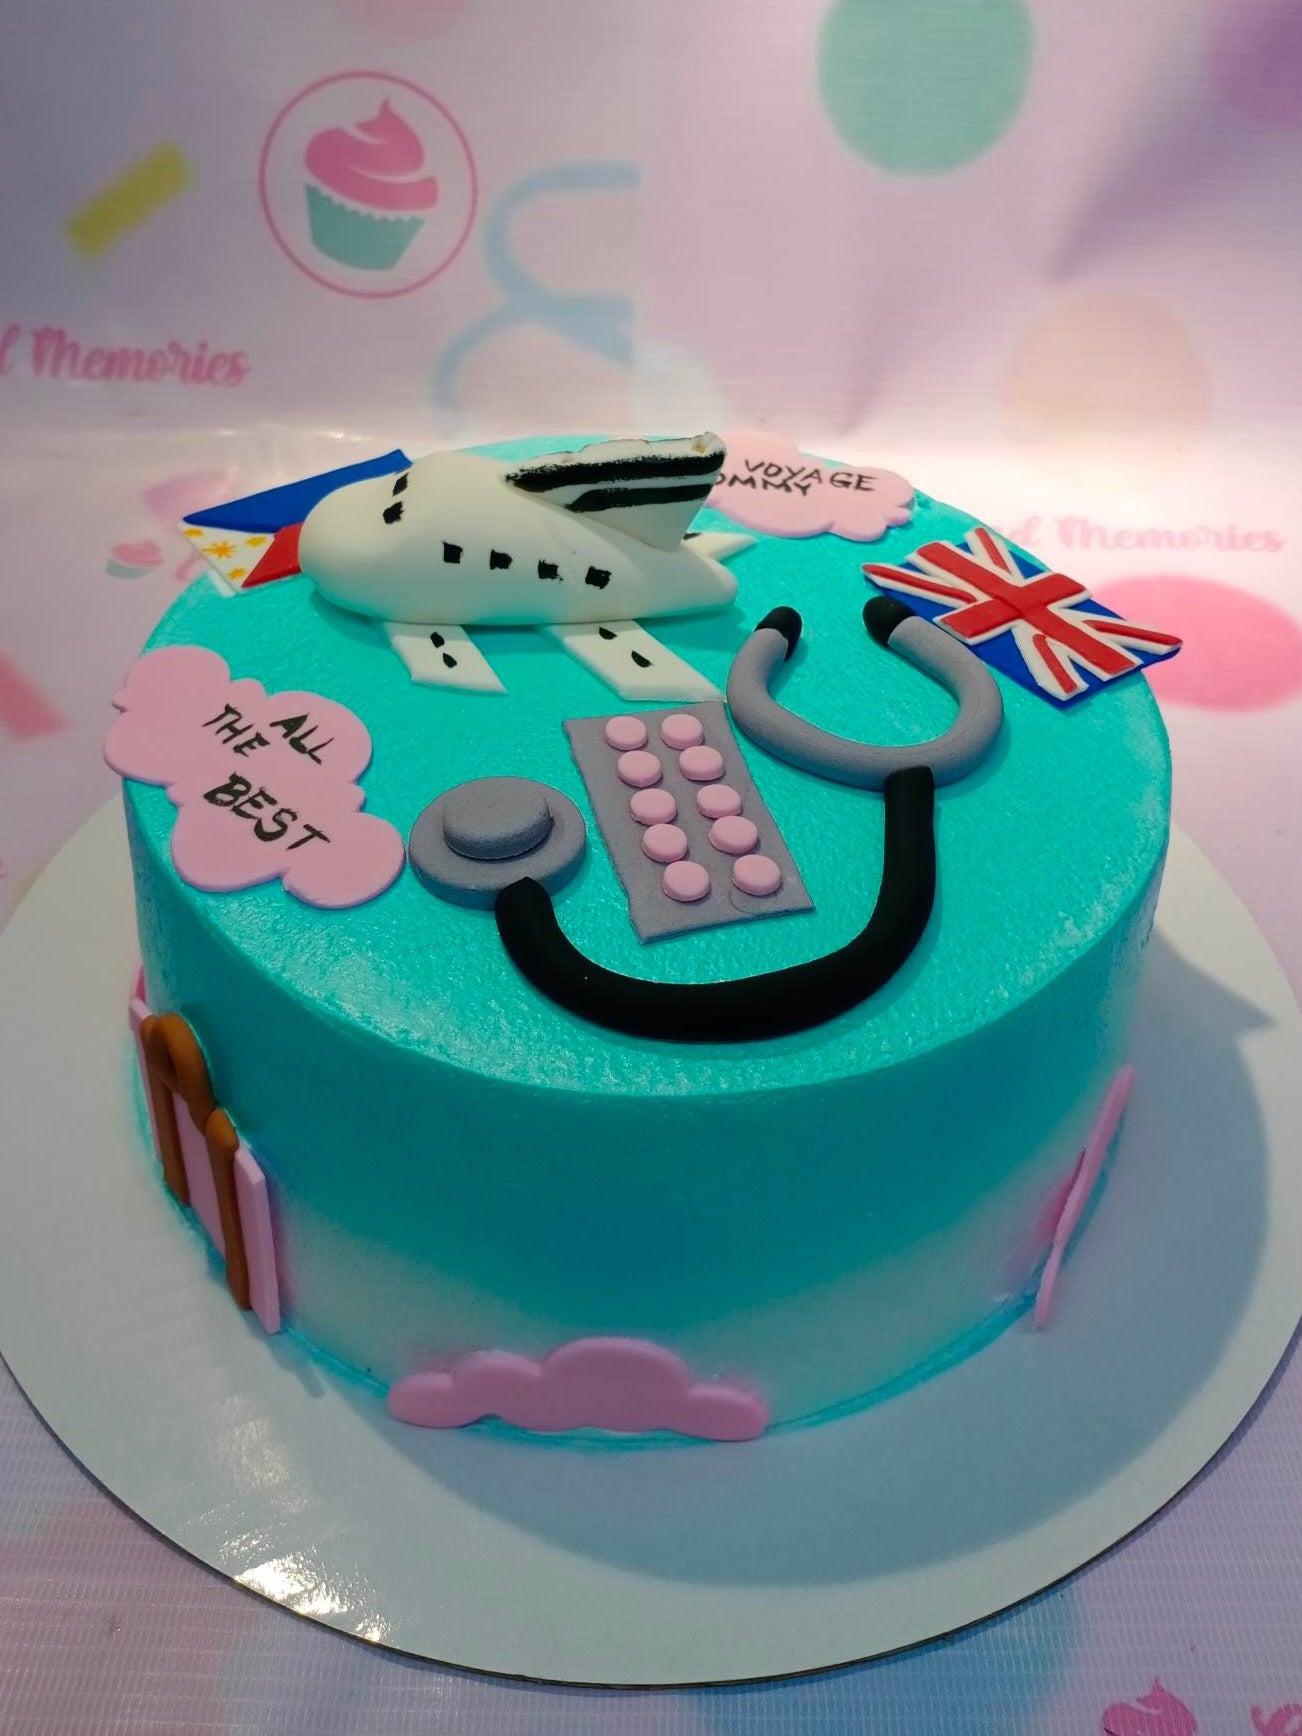 This delightful custom decorated cake is perfect for a traveler's special birthday. It features a colorful design of airplanes, passports, and countries, with shades of blue, green and teal. Perfectly topped with a "Bon Voyage" or "Au Revoir" message, this cake is guaranteed to bring an adventurous spirit to any celebration.